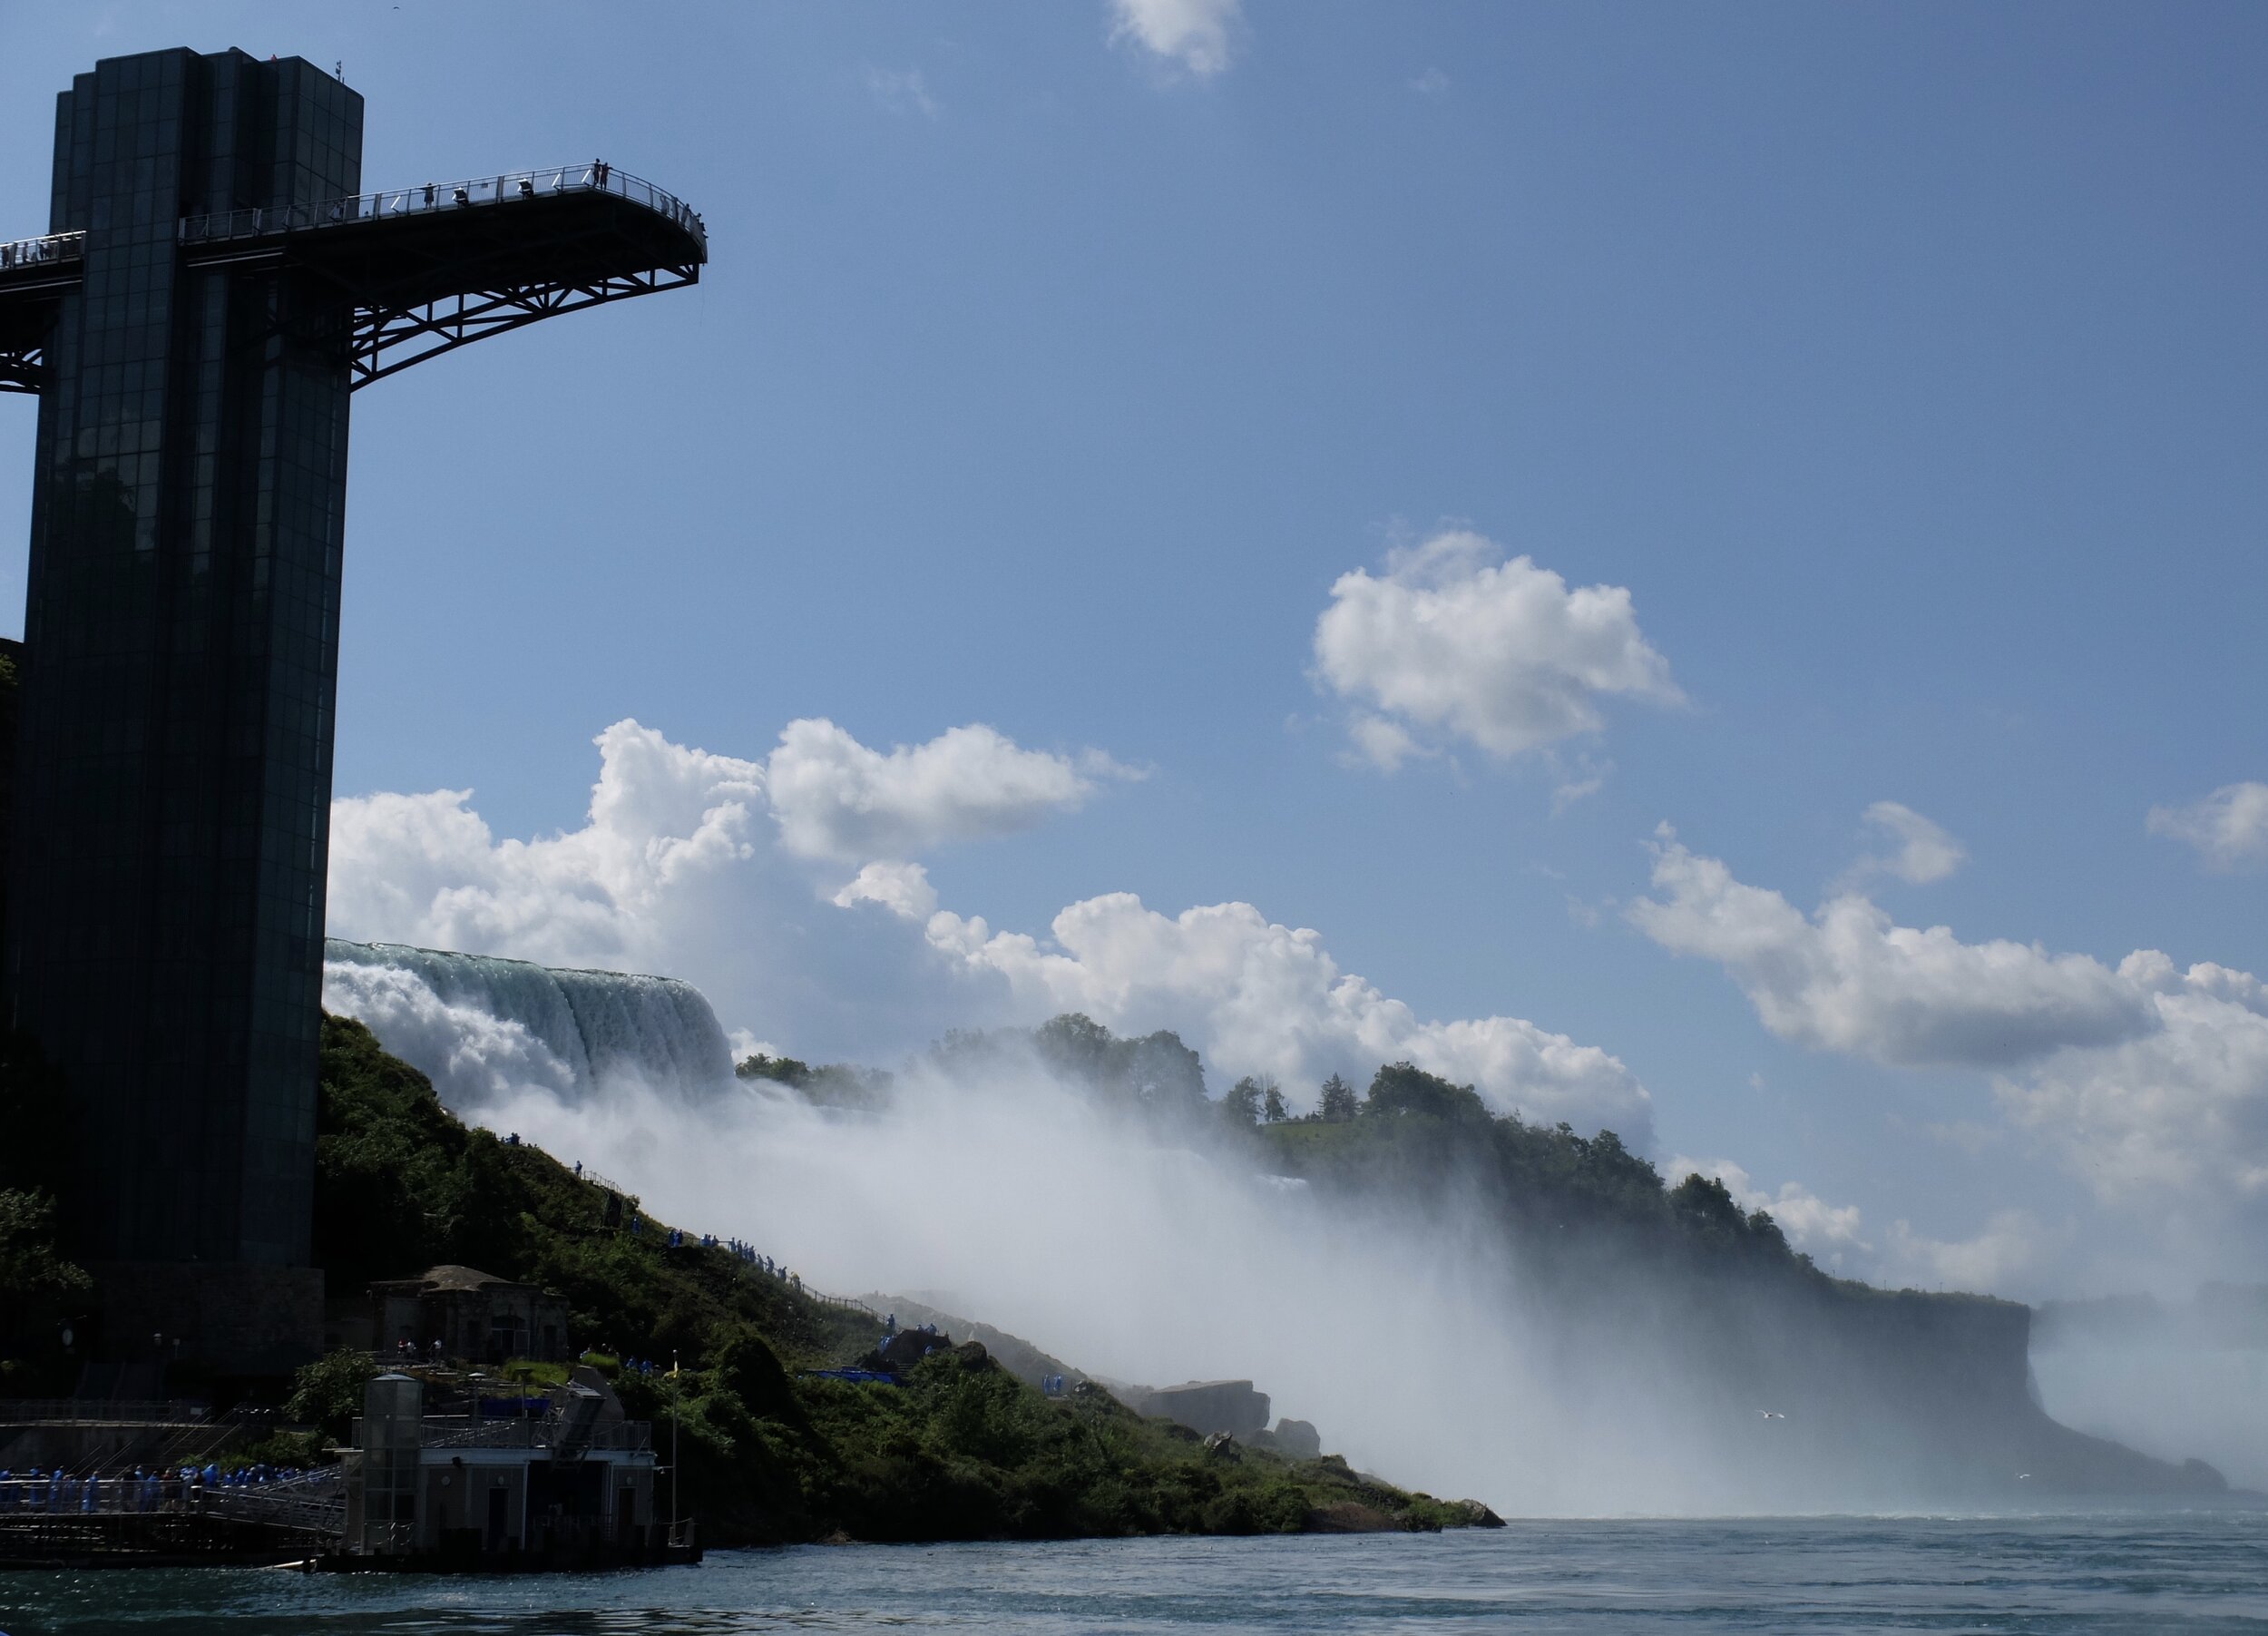 The Maid of the Mist fare included entrance to Niagara Falls USA Prospect Point Observation Tower.   It afforded unobstructed views of the Niagara Falls &amp; the river below.. 